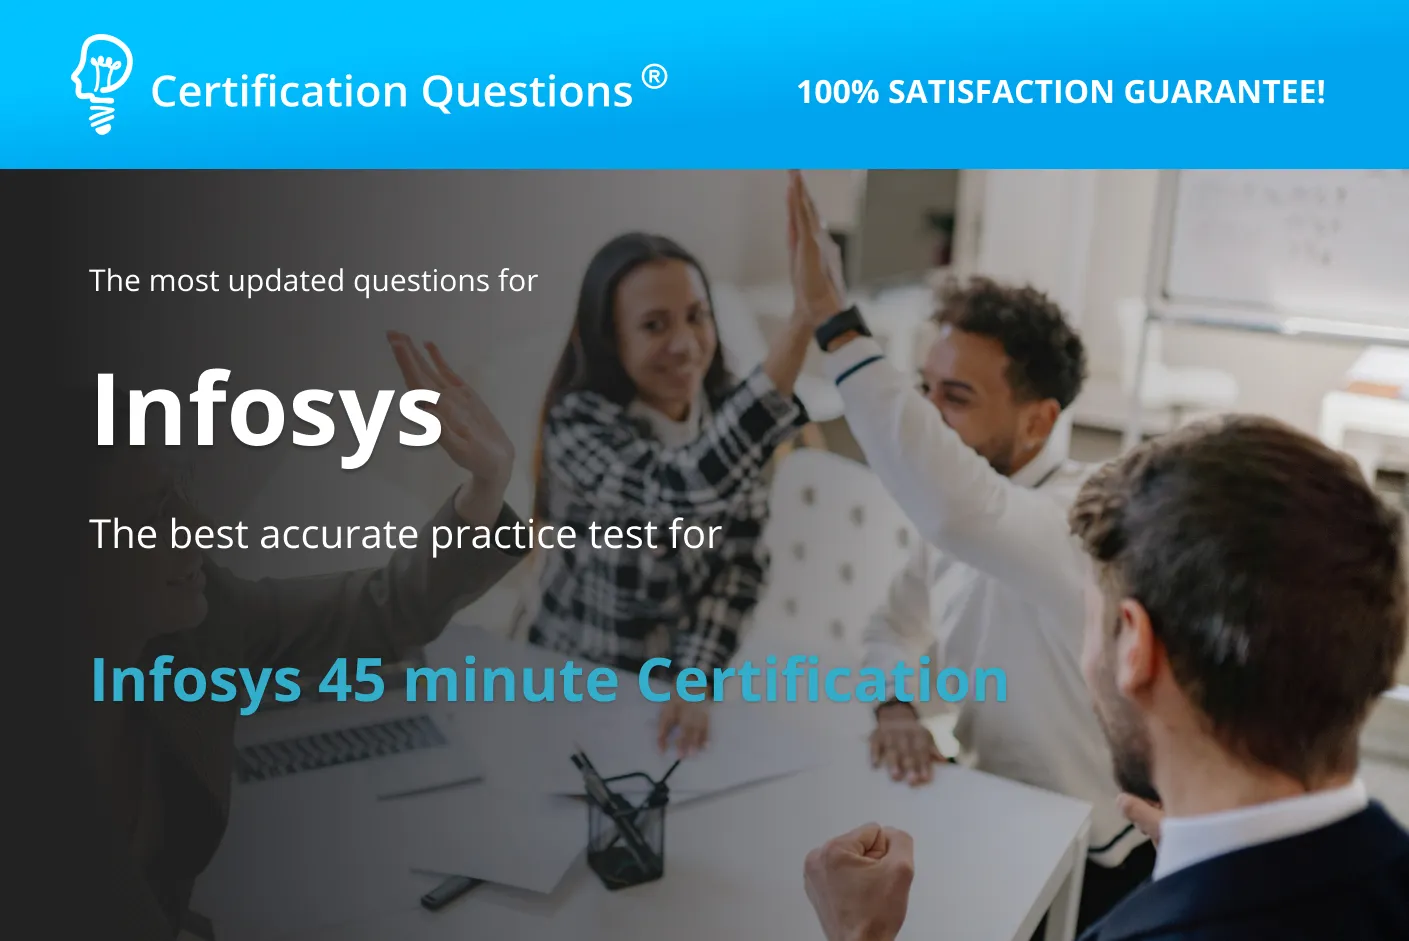 Image is to infosys 45 minute certification practice test